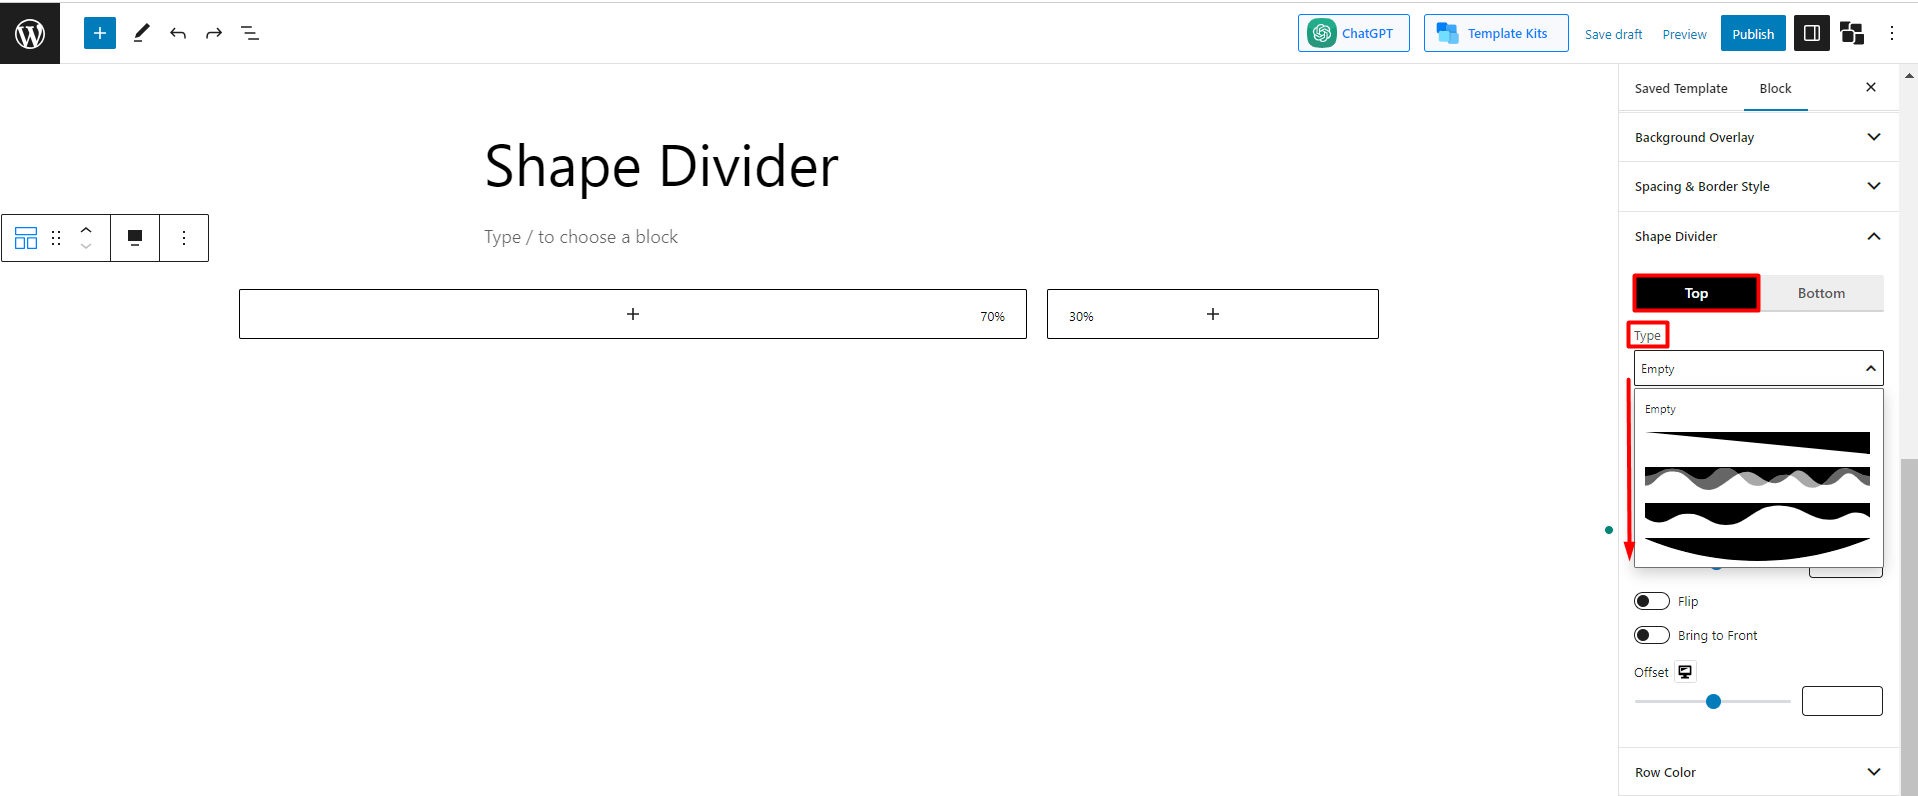 types of shape dividers